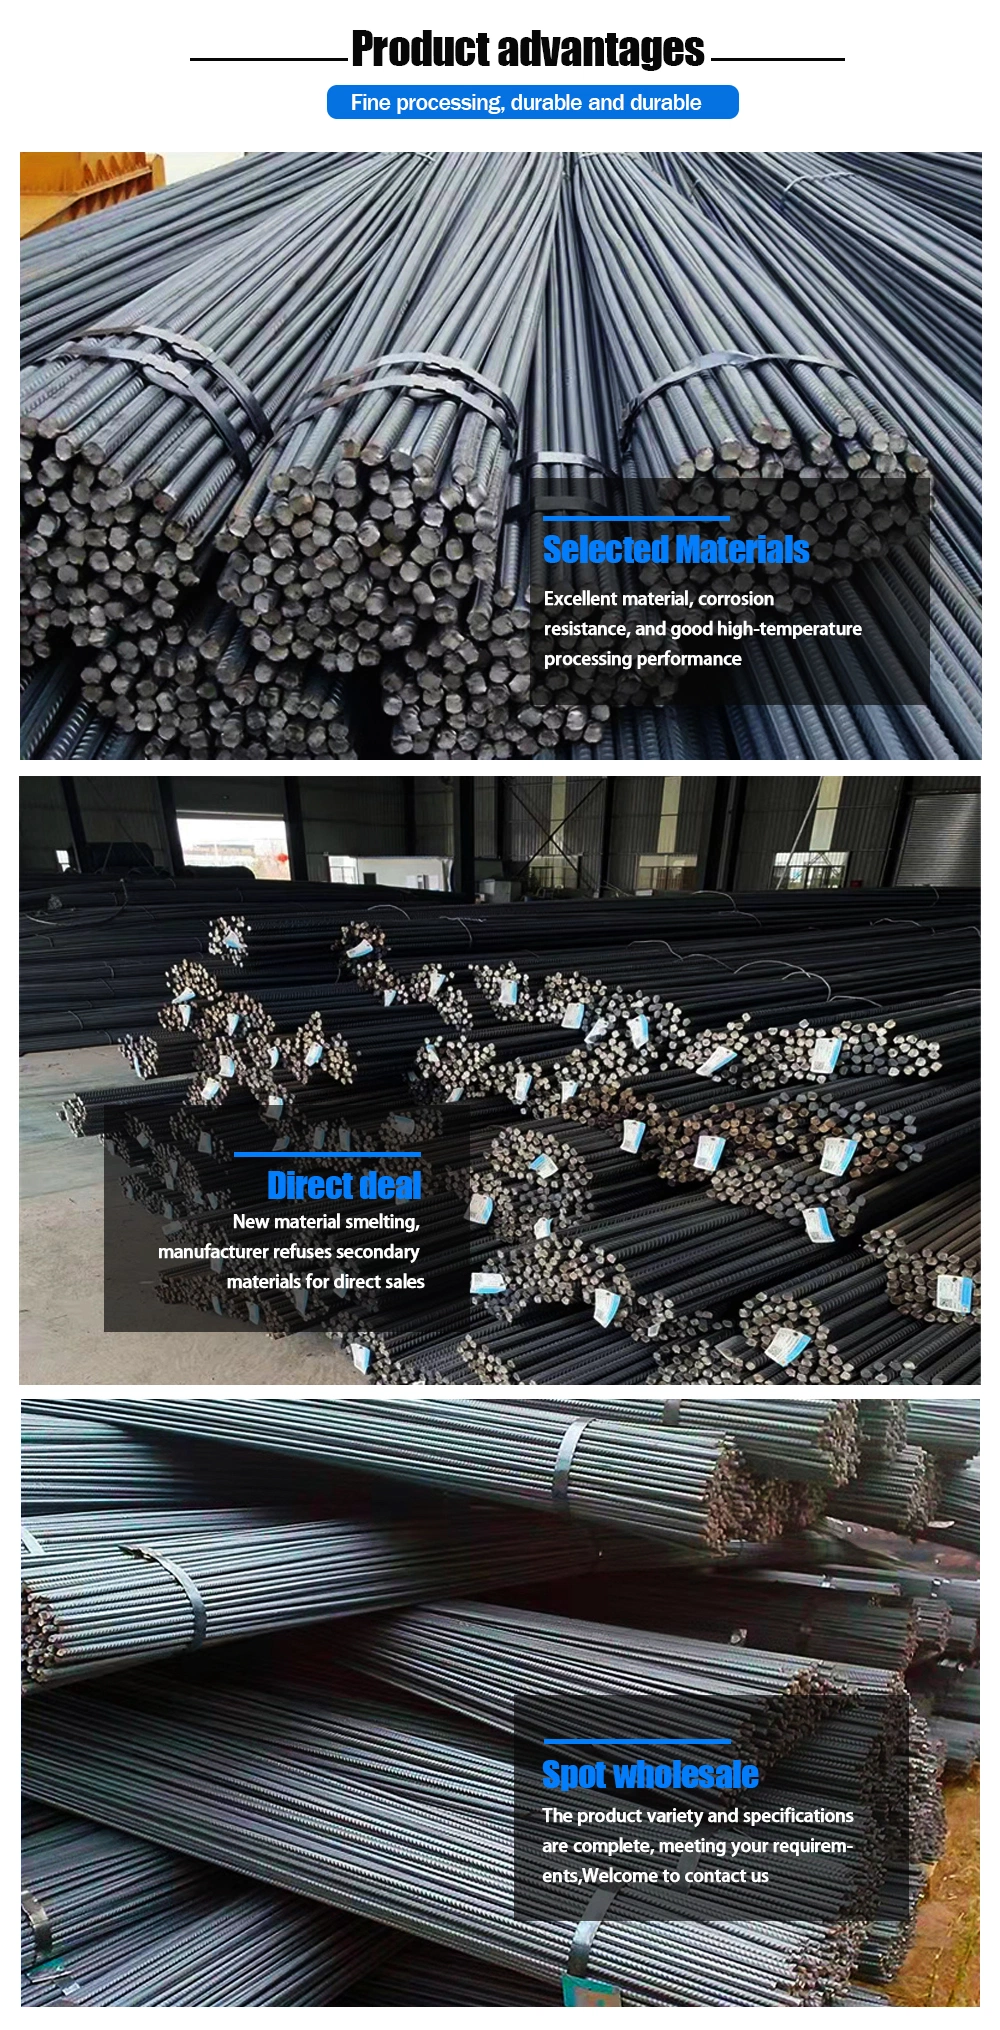 50mm BS4449 460b 500b 500c Carbon Round Reinforcing Iron Rod Bars